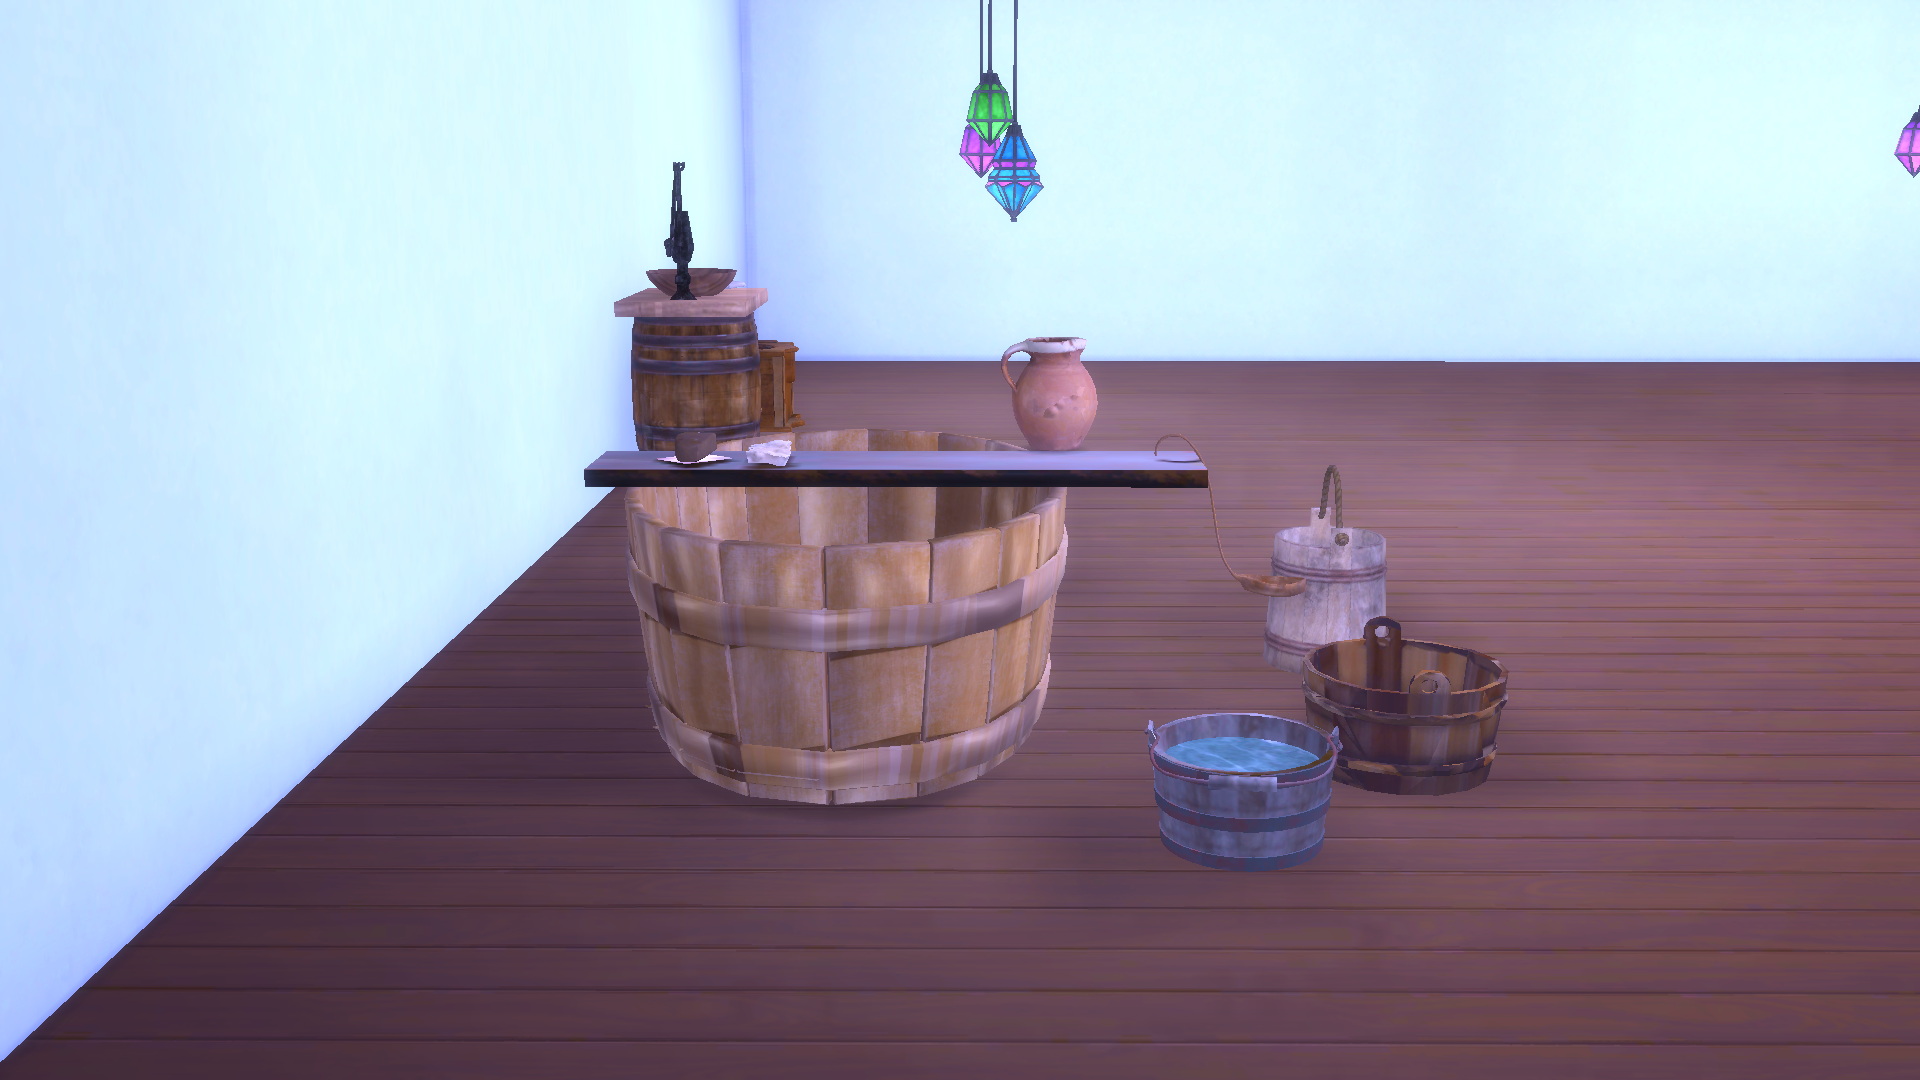 Medieval Bathroom Set by MiraiMayonaka at Mod The Sims 4 » Sims 4 Updates